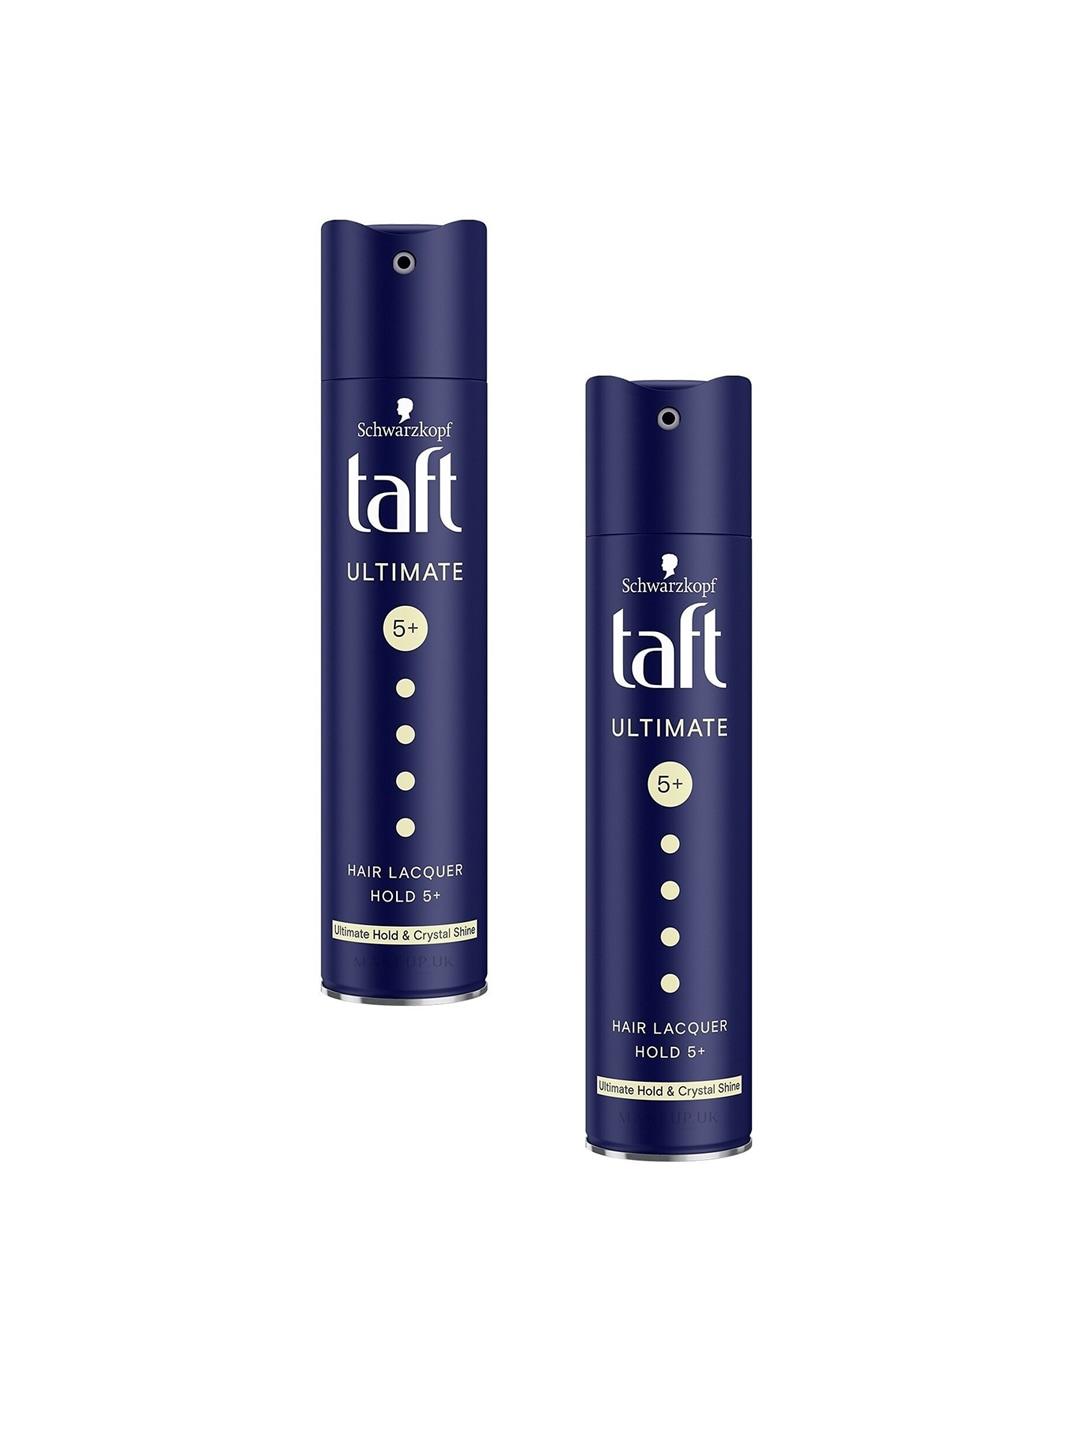 taft Set of 2 Ultimate 5+ Hair Lacquer - 250 ml each